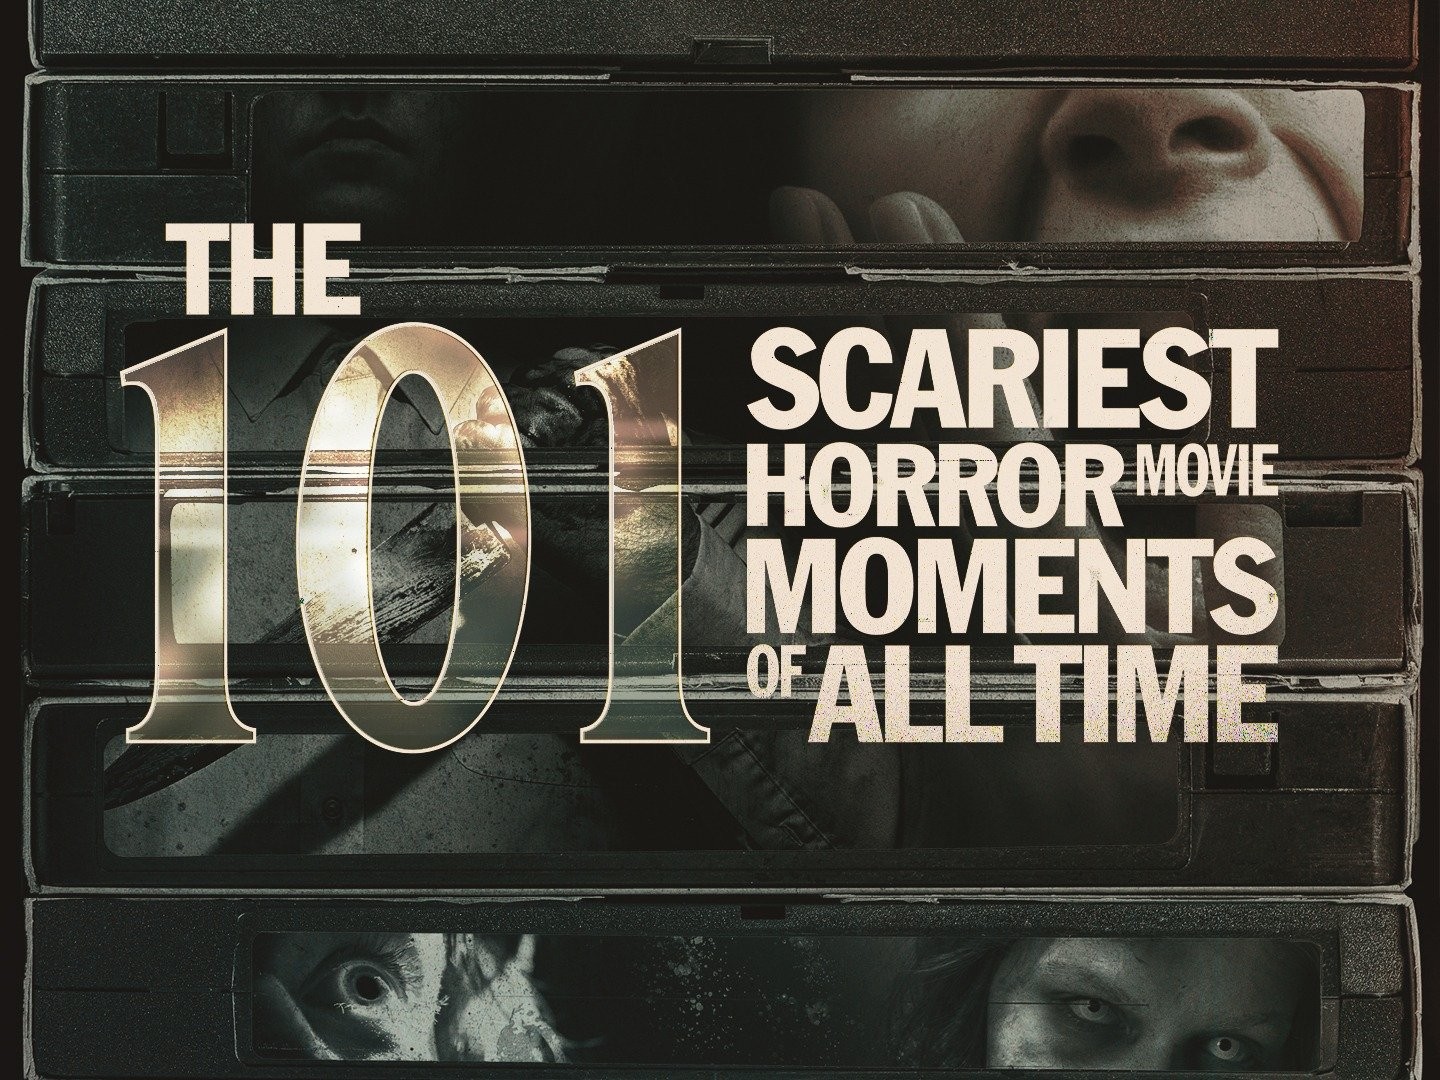 101 Best Horror Movies of All Time